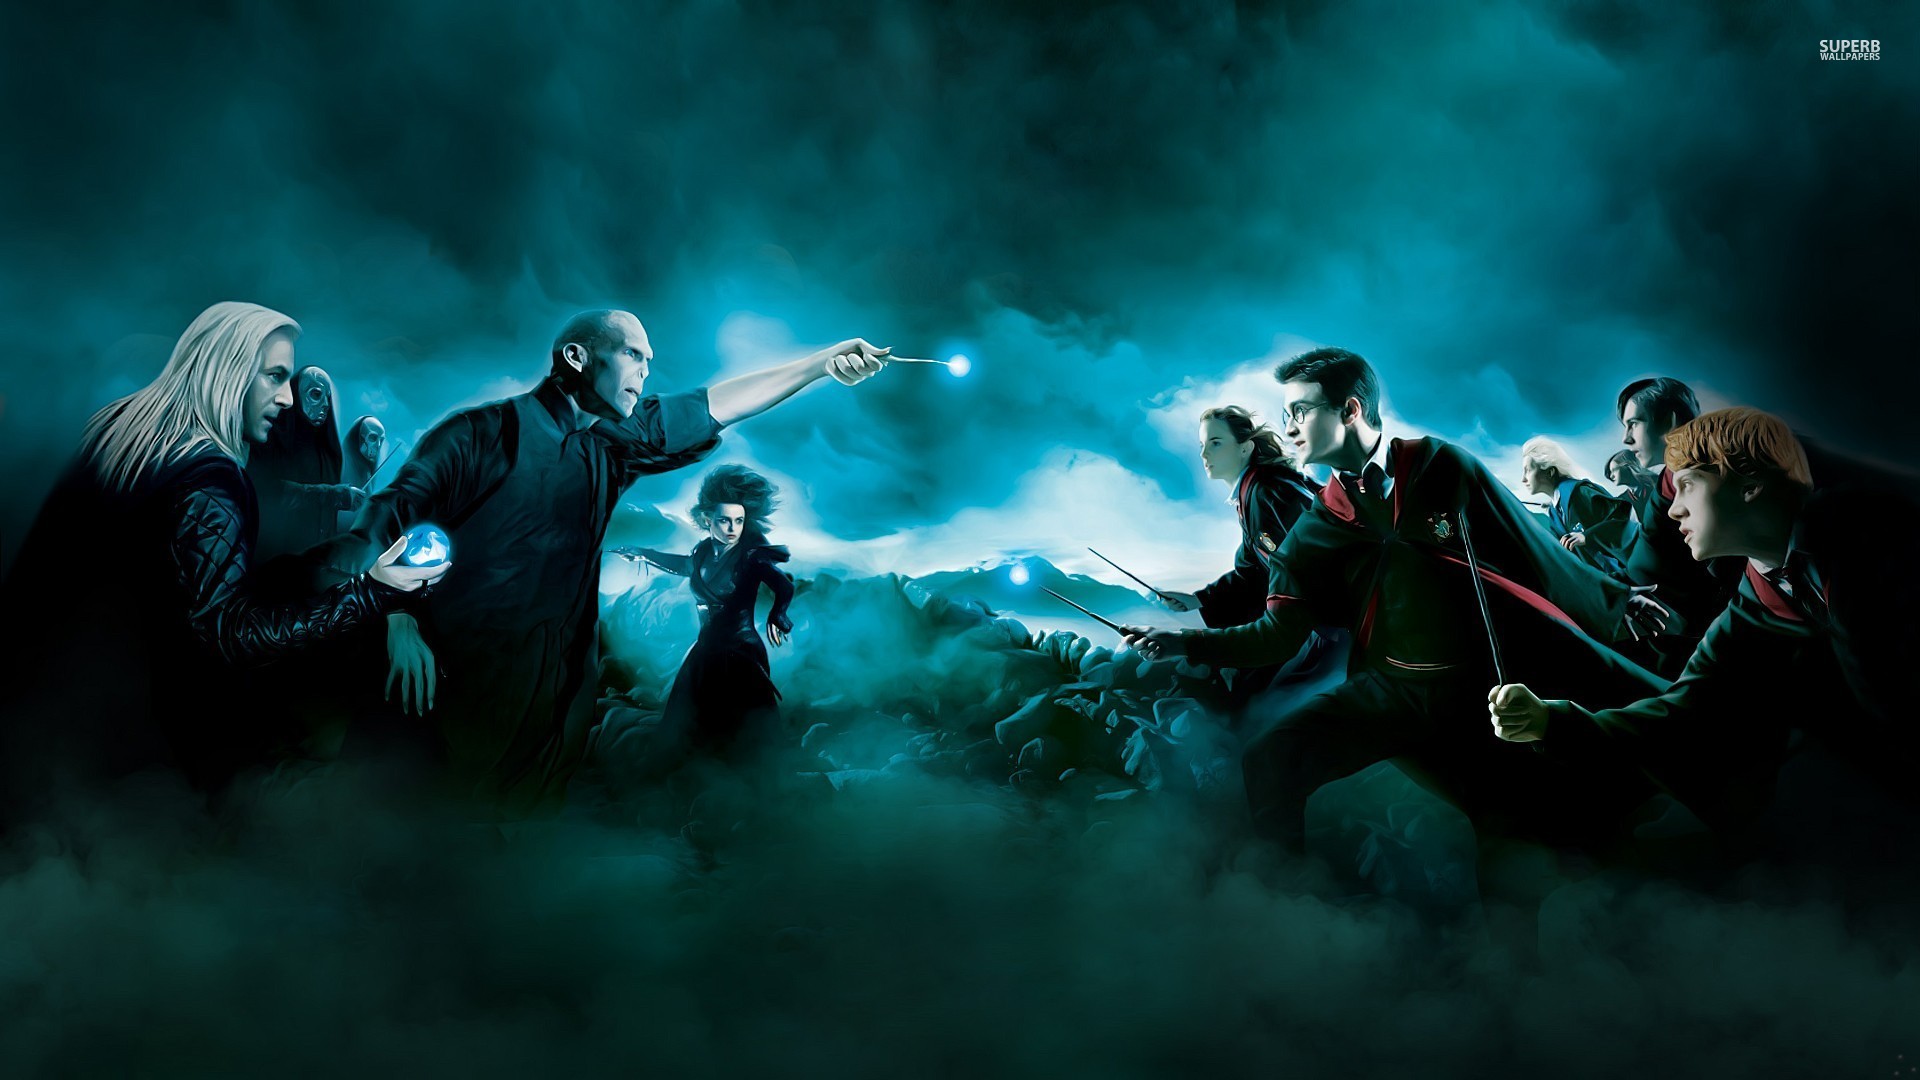 Harry Potter and the Deathly Hallows Part 2 wallpaper - Movie